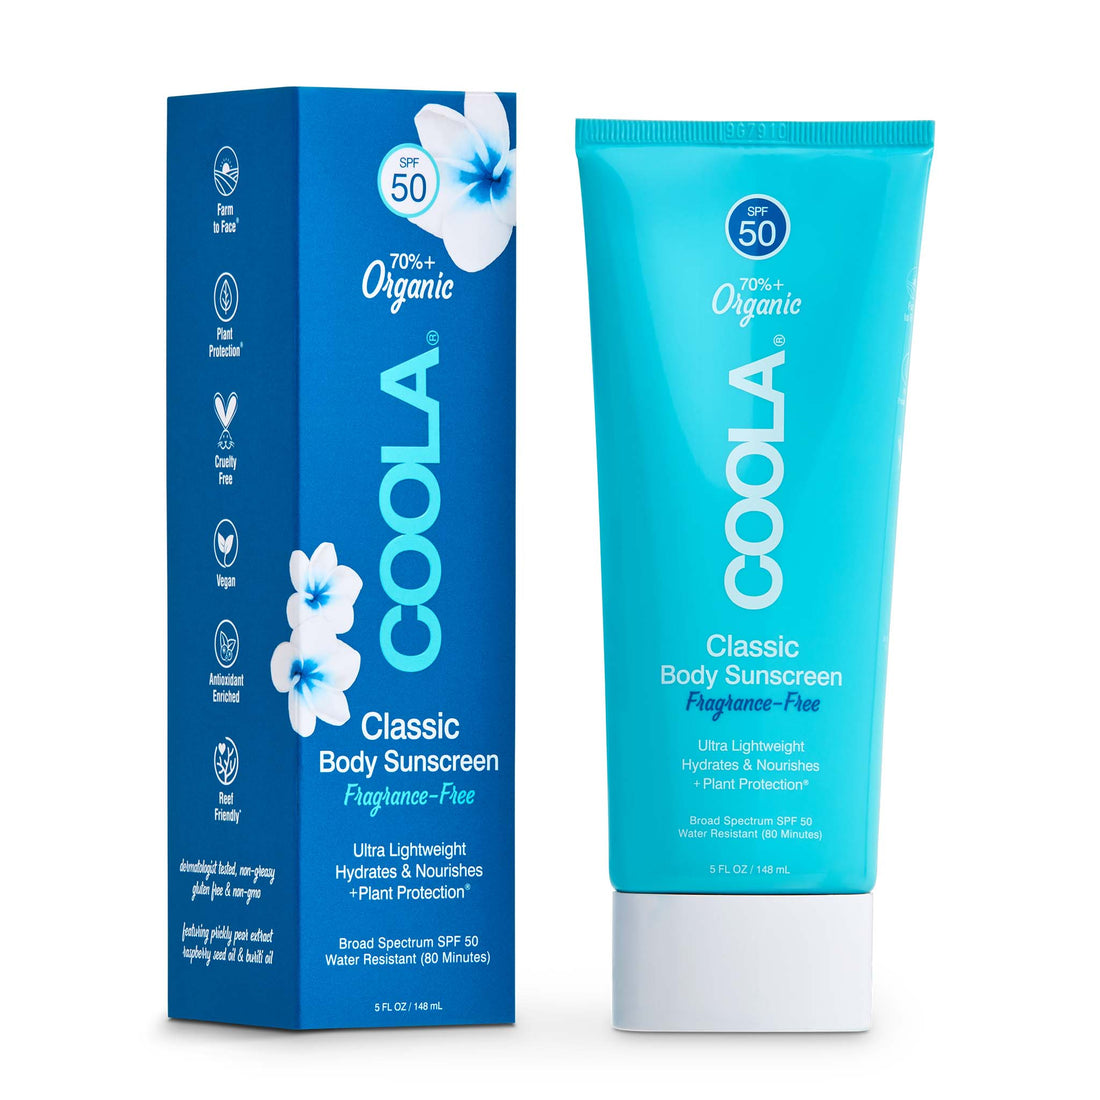 Coola body sunscreen is a spf 50, ultra light, protects and hydrates the skin